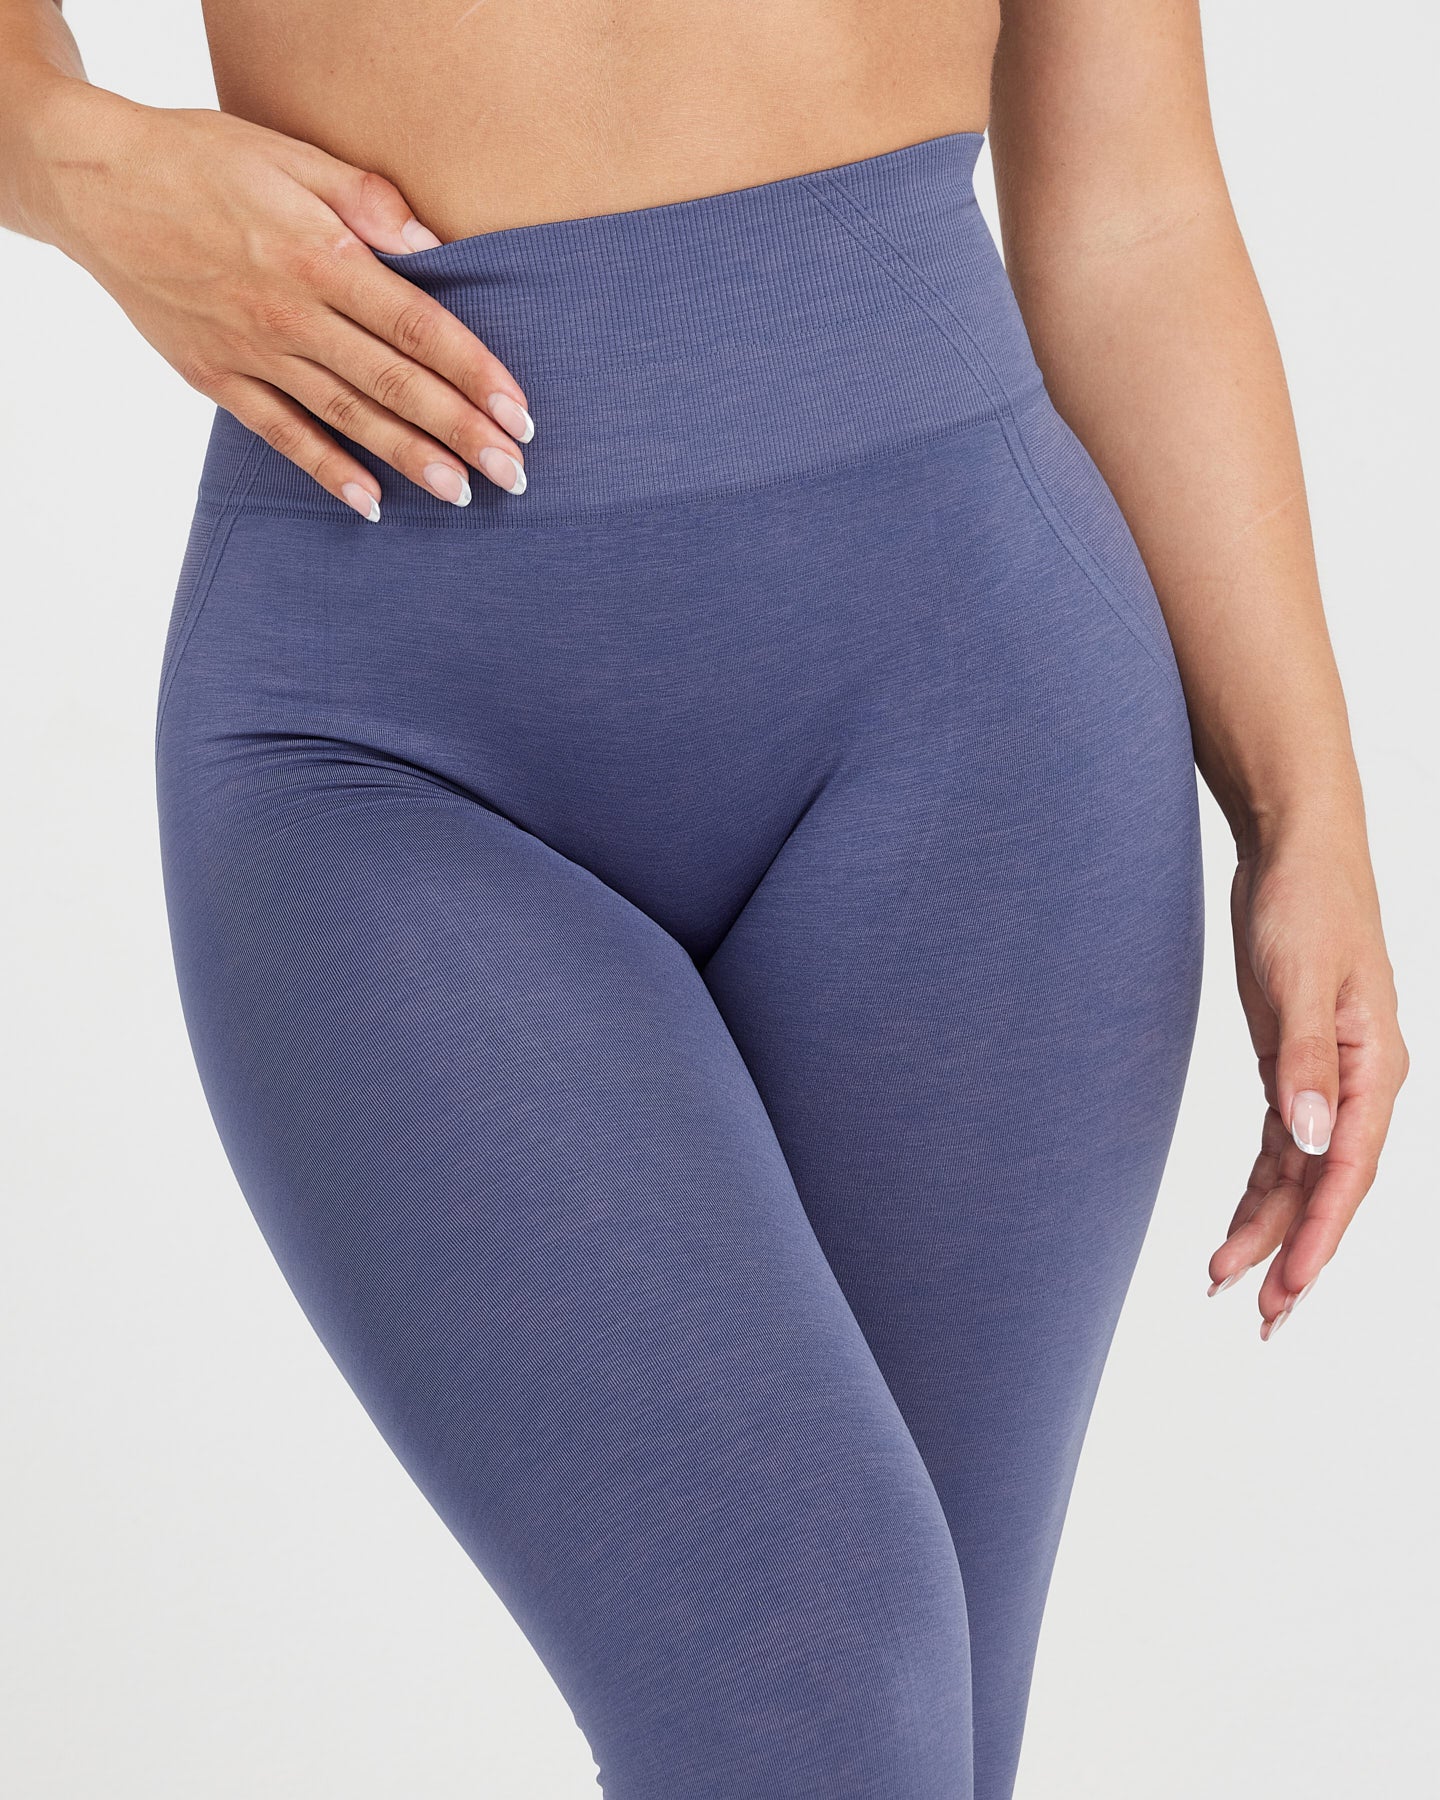 Shop Prisma's Cuff Length Leggings in Slate for a Stylish Look